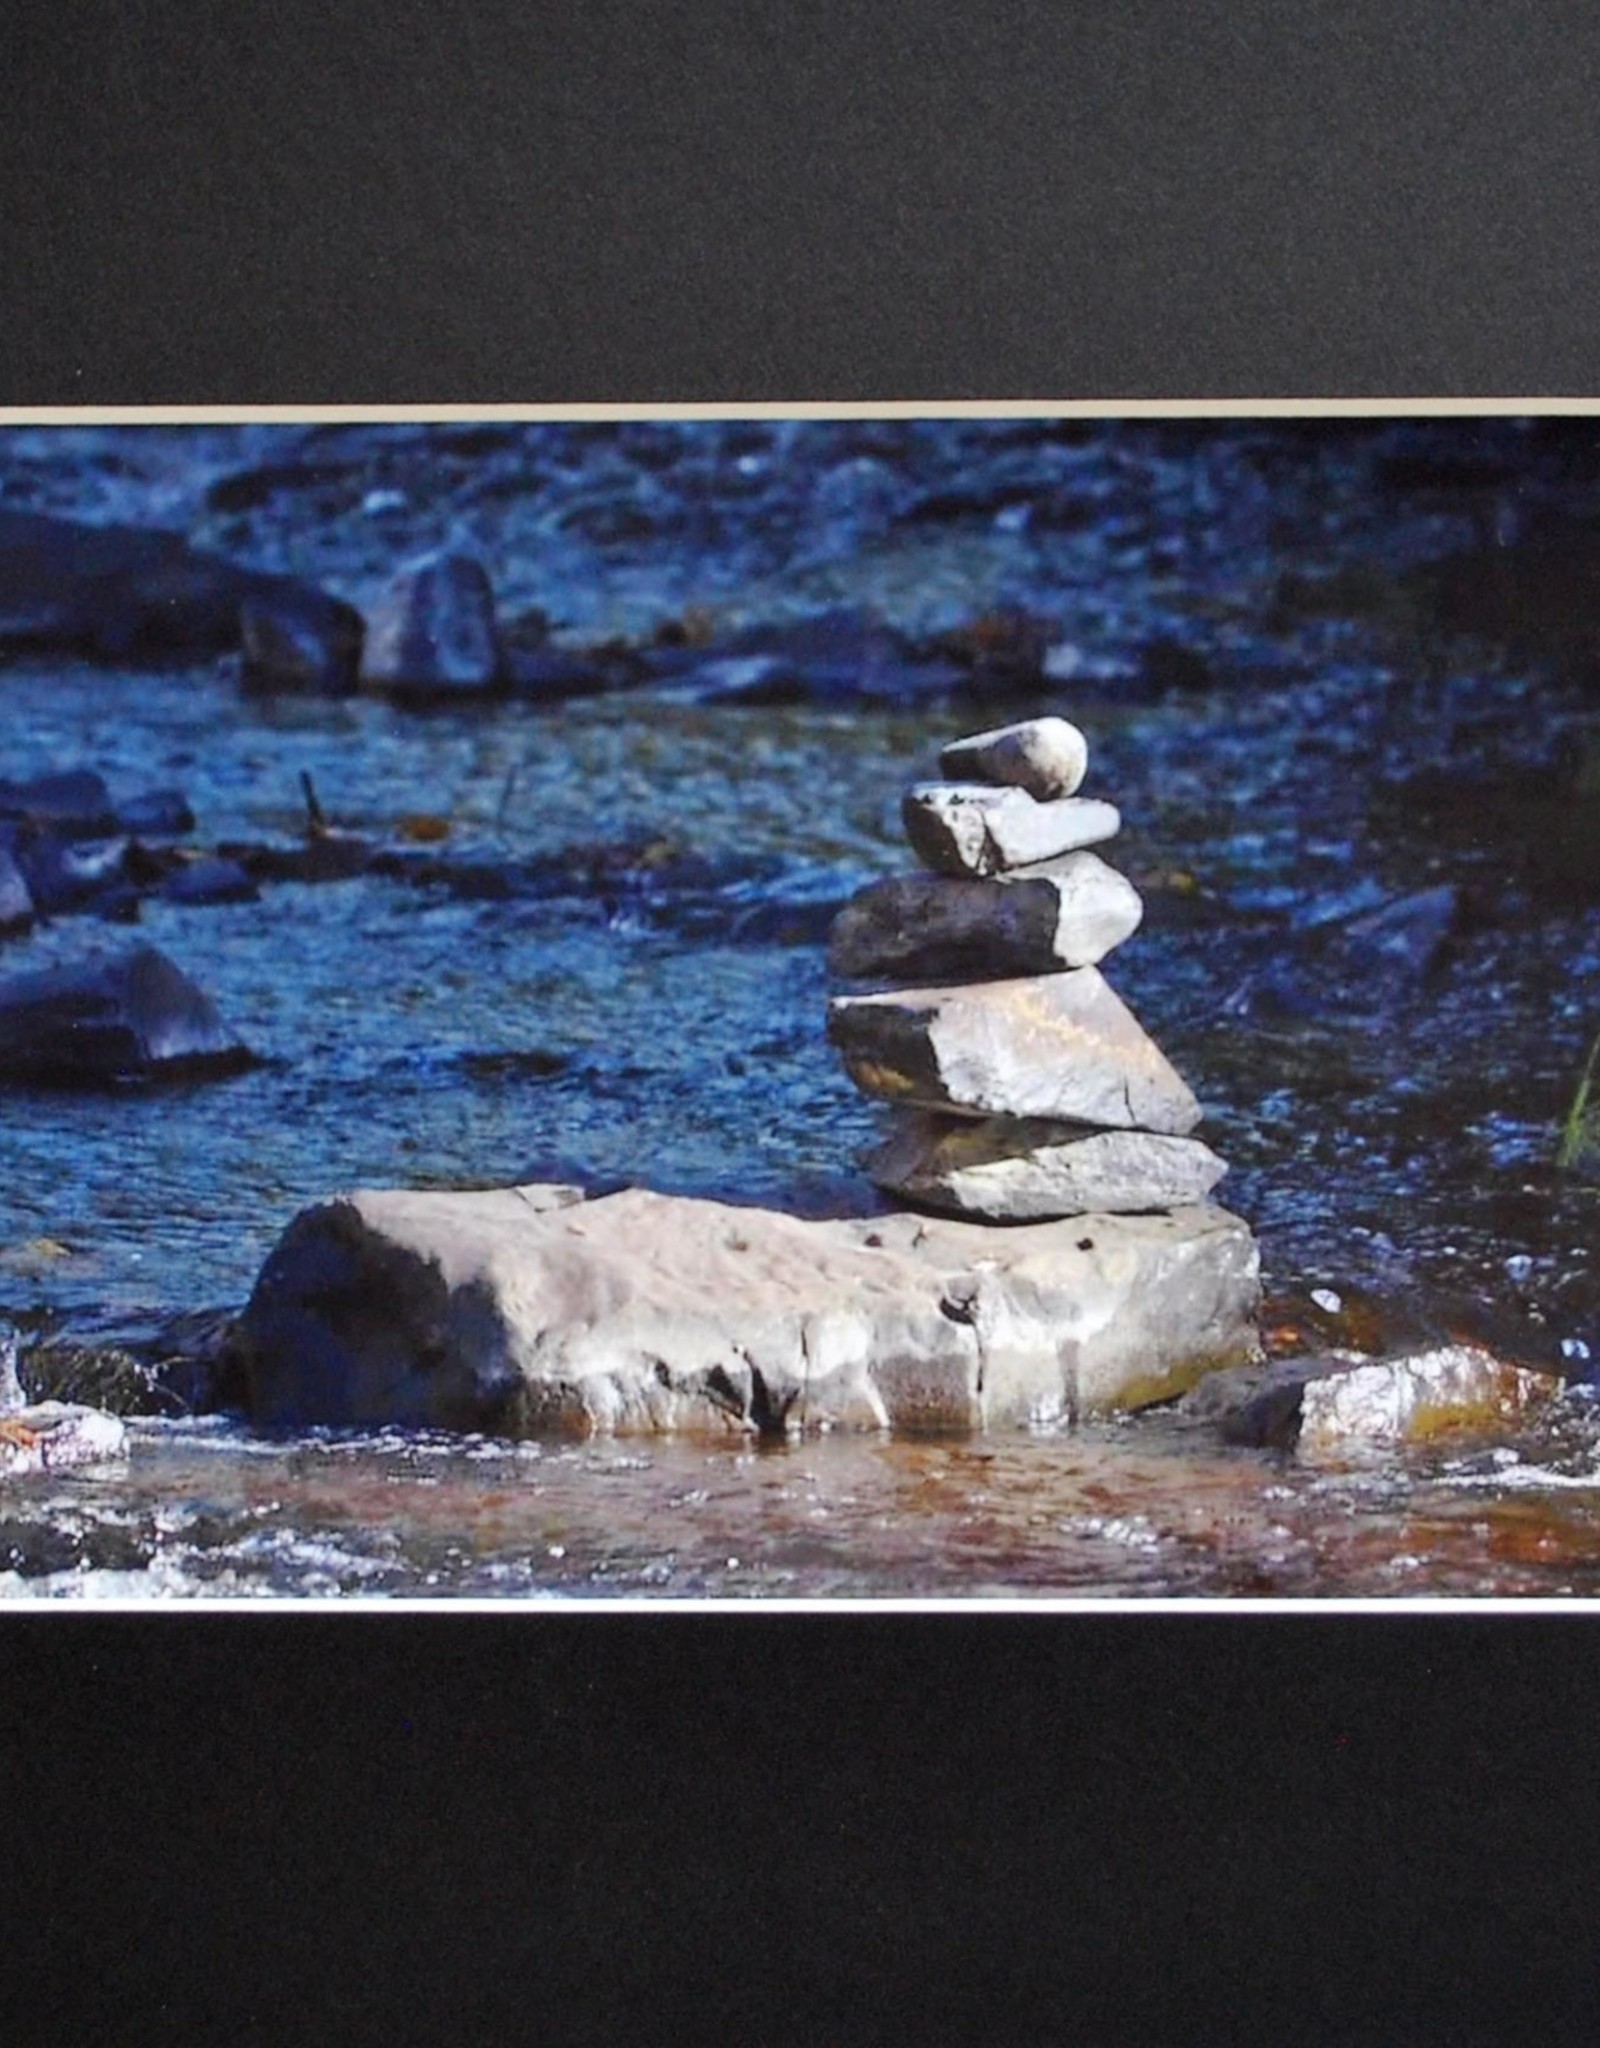 Daria Percy Matted “Rocks” 5x7 photograph by Daria Percy